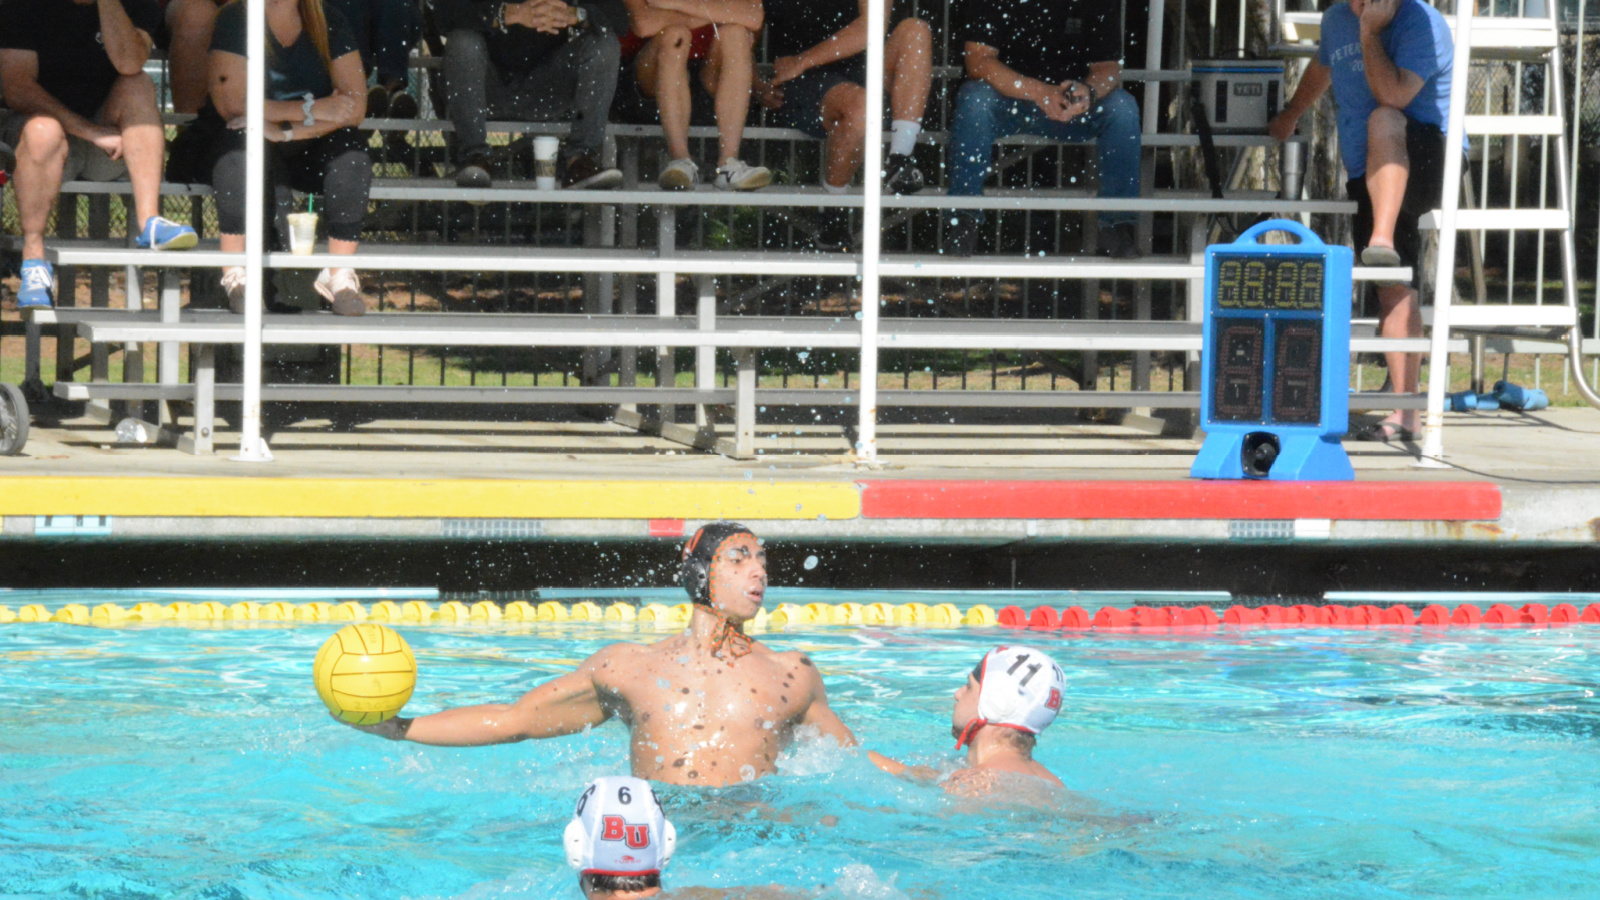 La Verne Takes On Whittier In Home Match